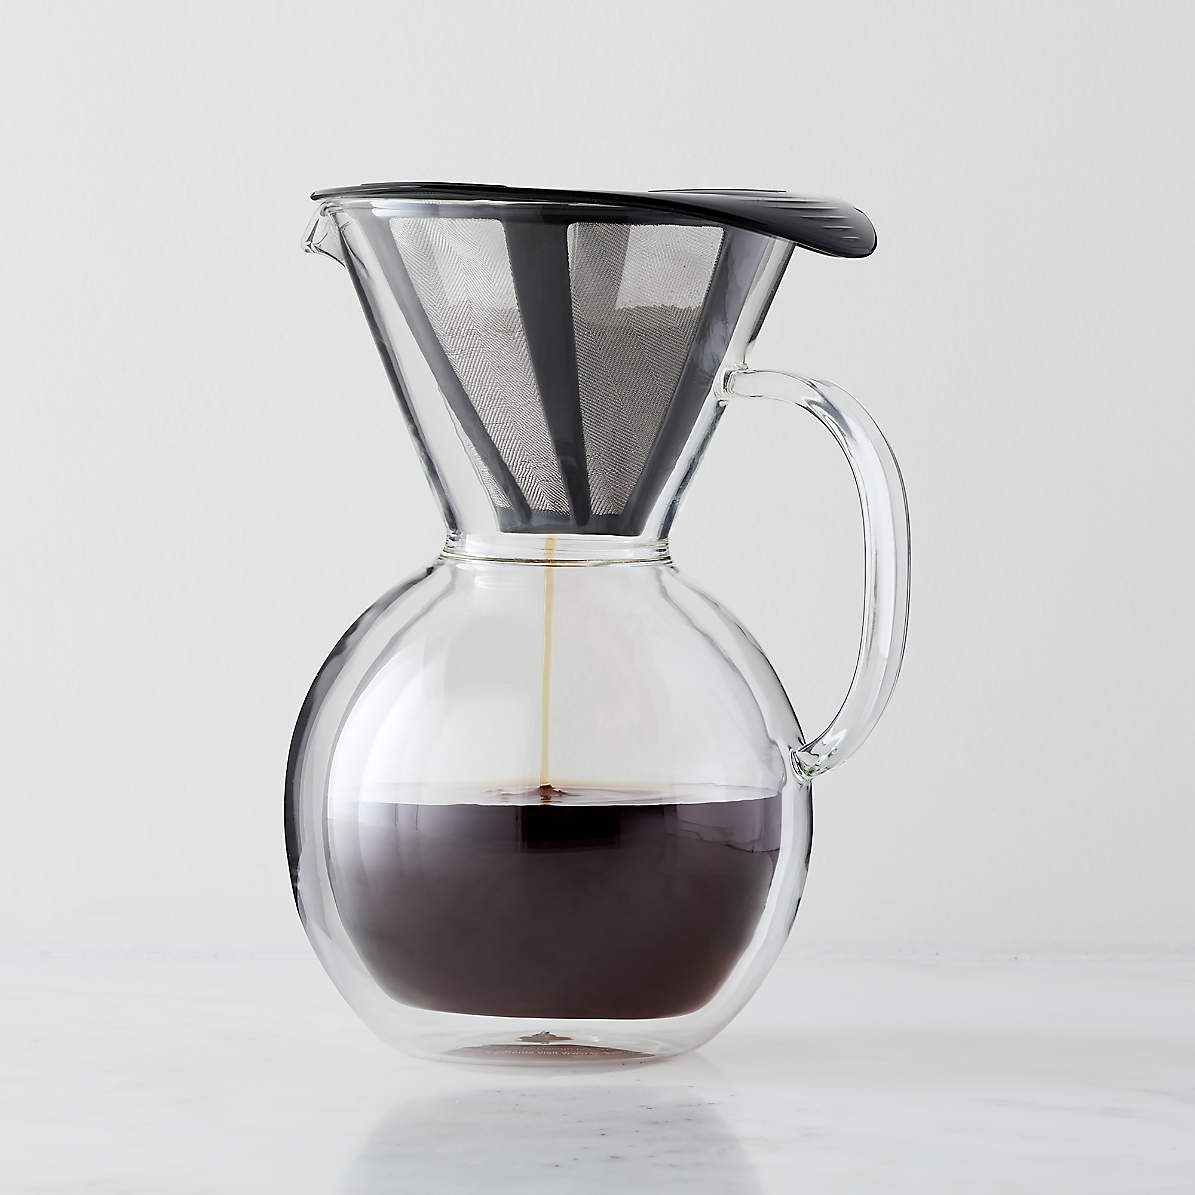 BODUM BODUM Pour Over Double Wall Coffee Maker Missing Filter 